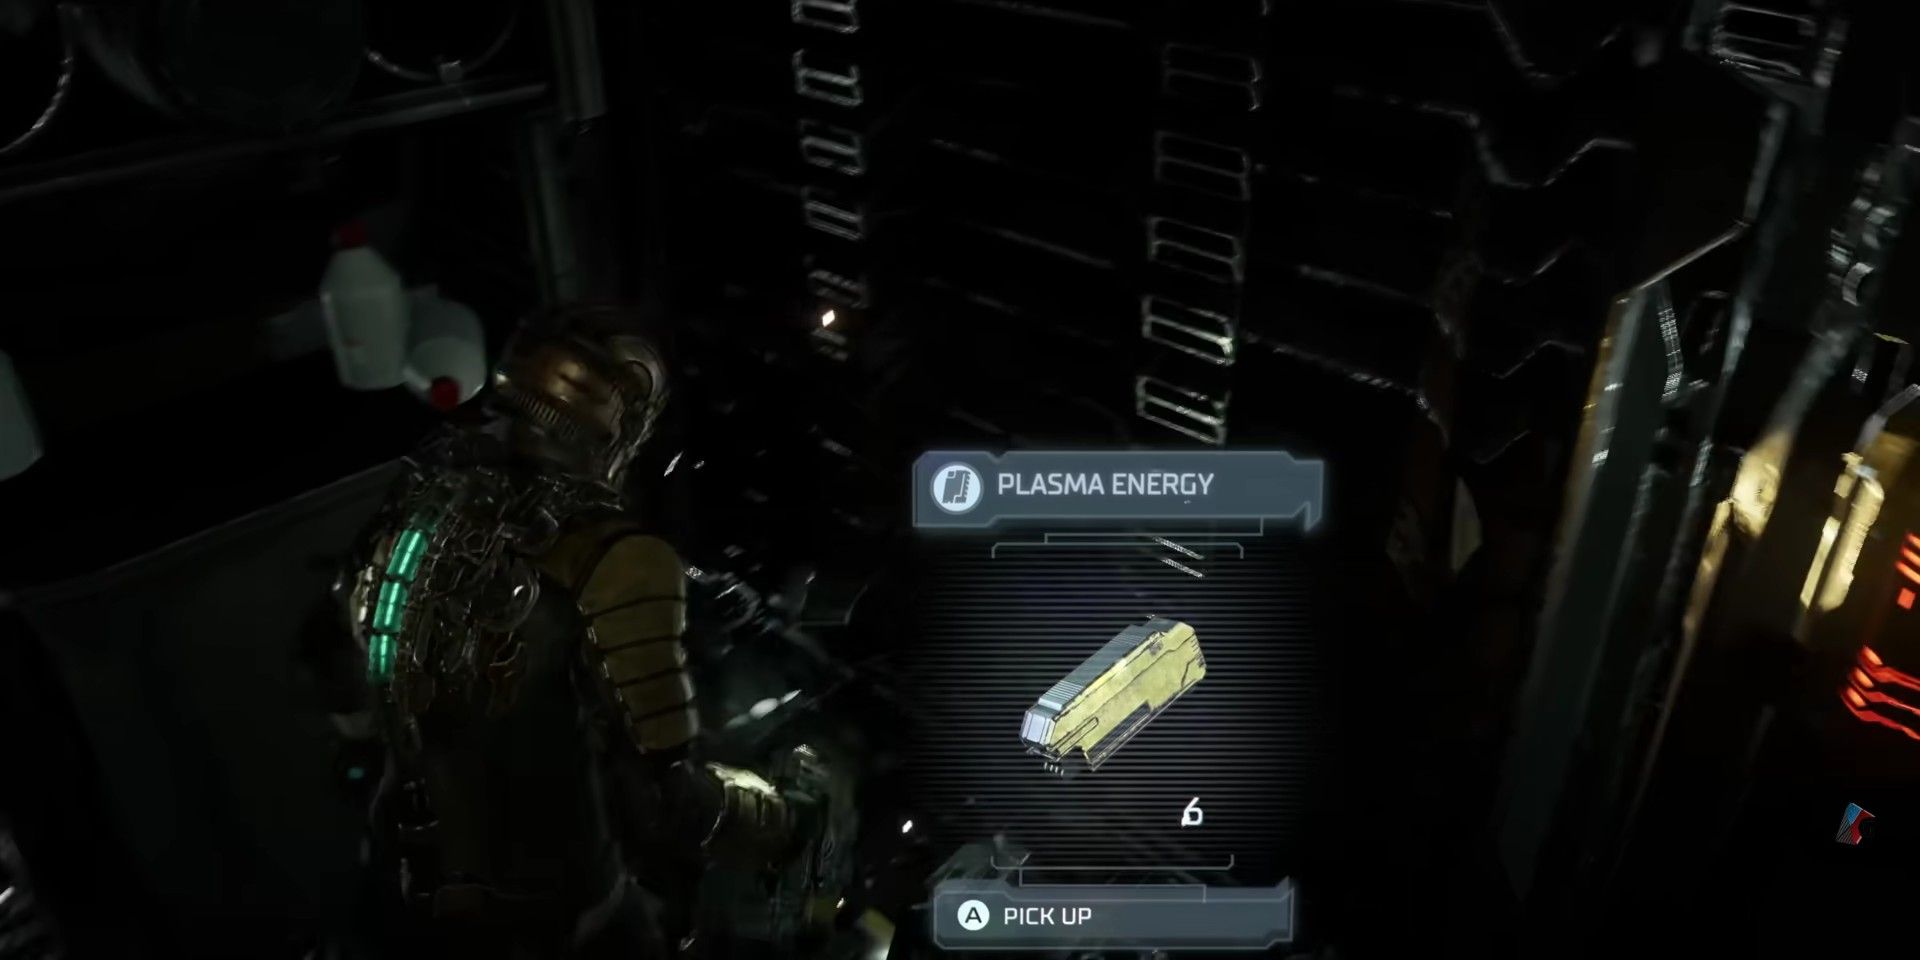 Dead Space screenshot of Isaac about to pick up a Plasma Energy item drop